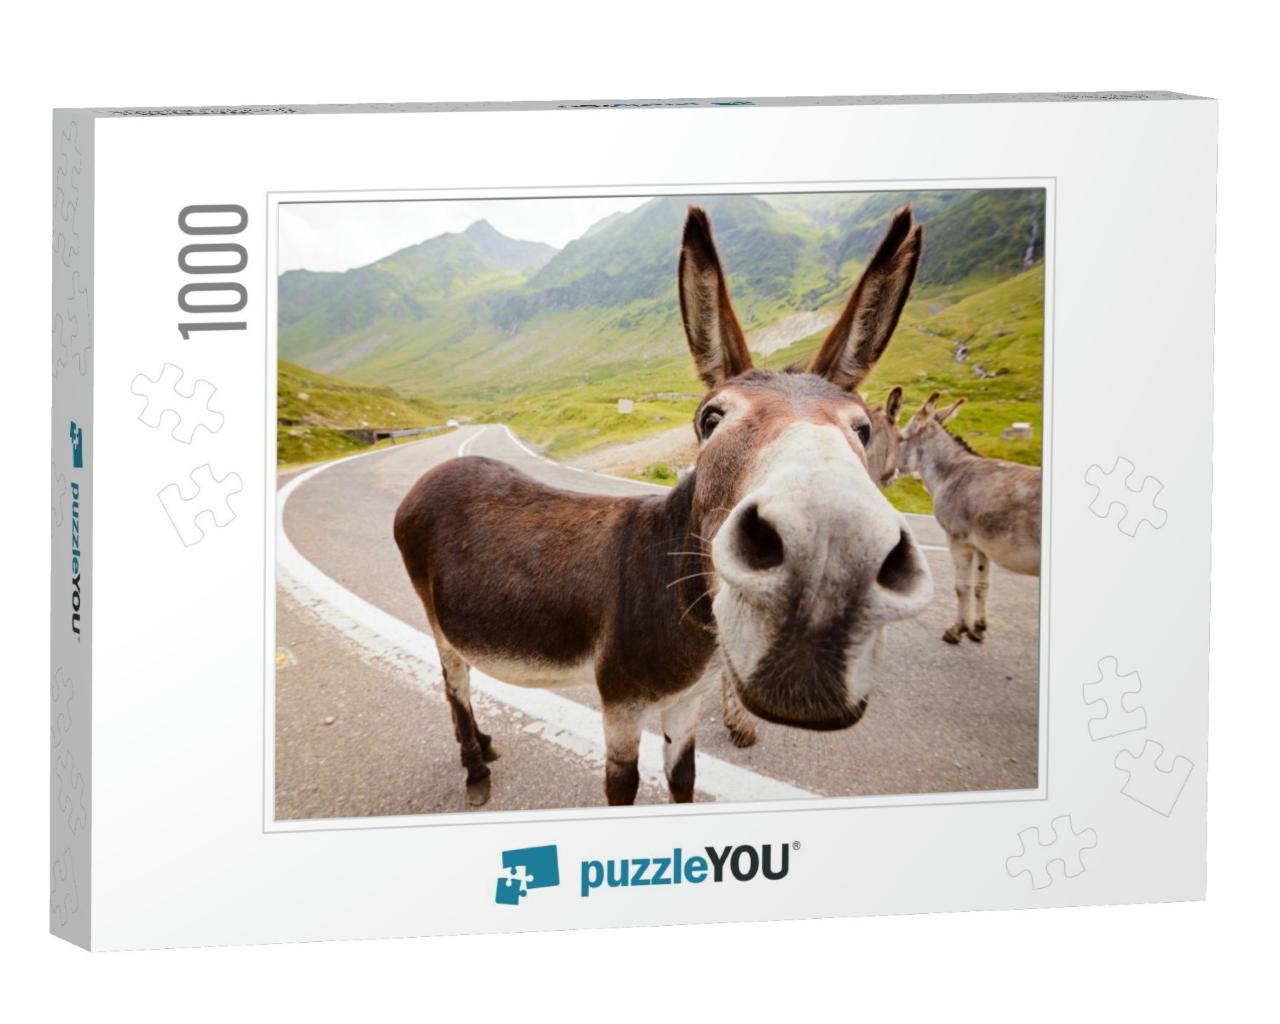 Funny Donkey on Transfagarasan Road in Romanian Mountains... Jigsaw Puzzle with 1000 pieces